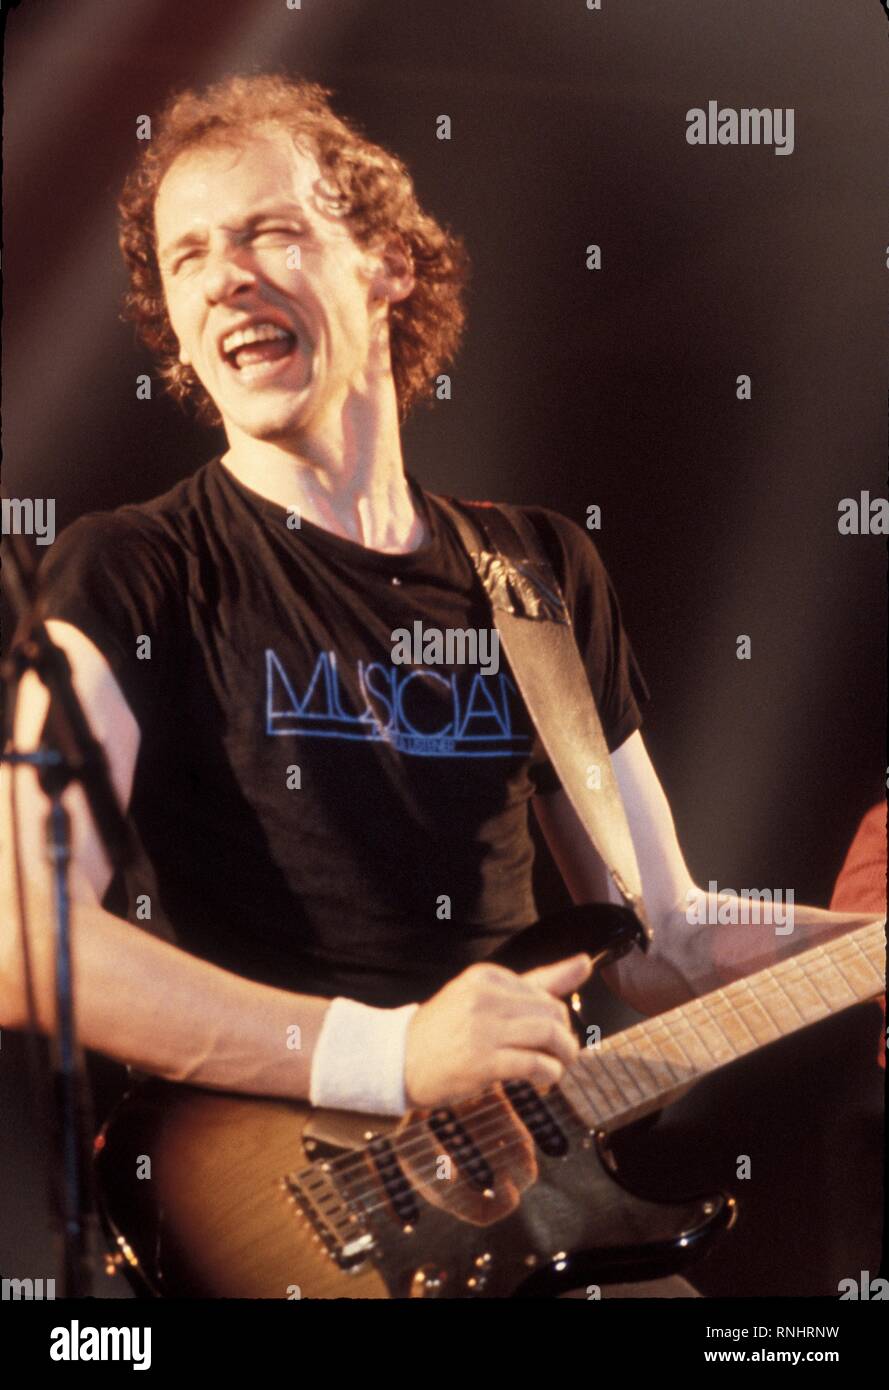 Mark Knopfler of Dire Straits is shown performing on stage during a concert  appearance Stock Photo - Alamy